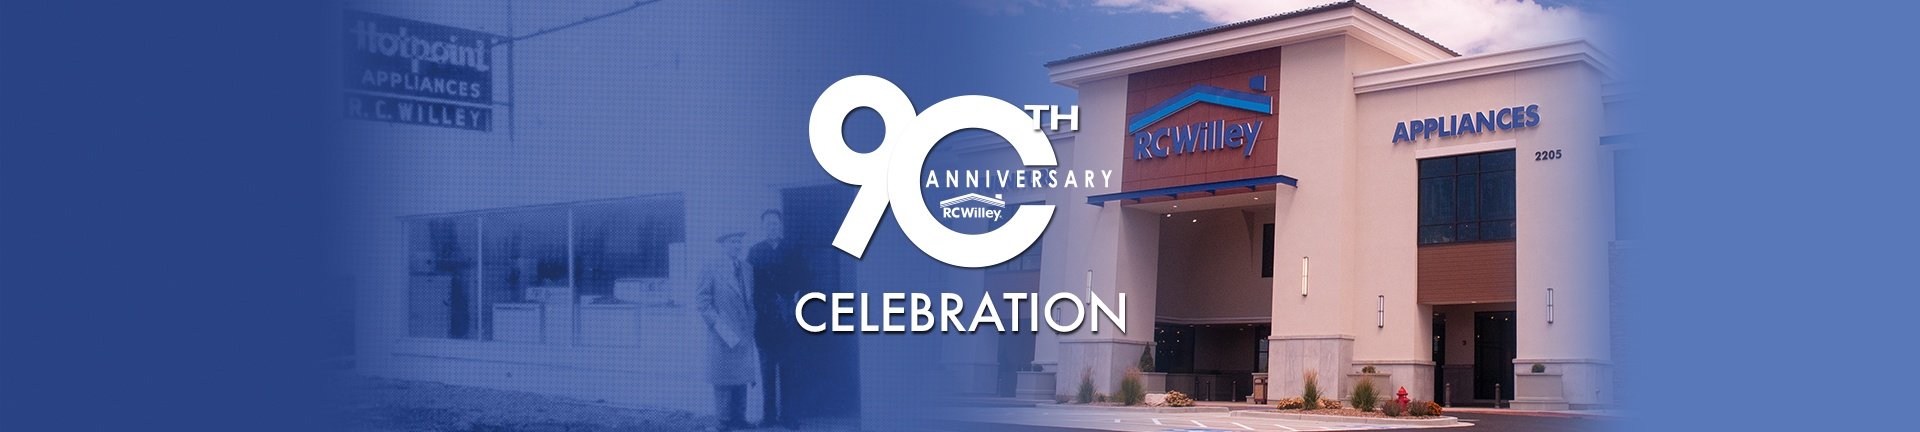 RC Willey's 90th Anniversary celebration